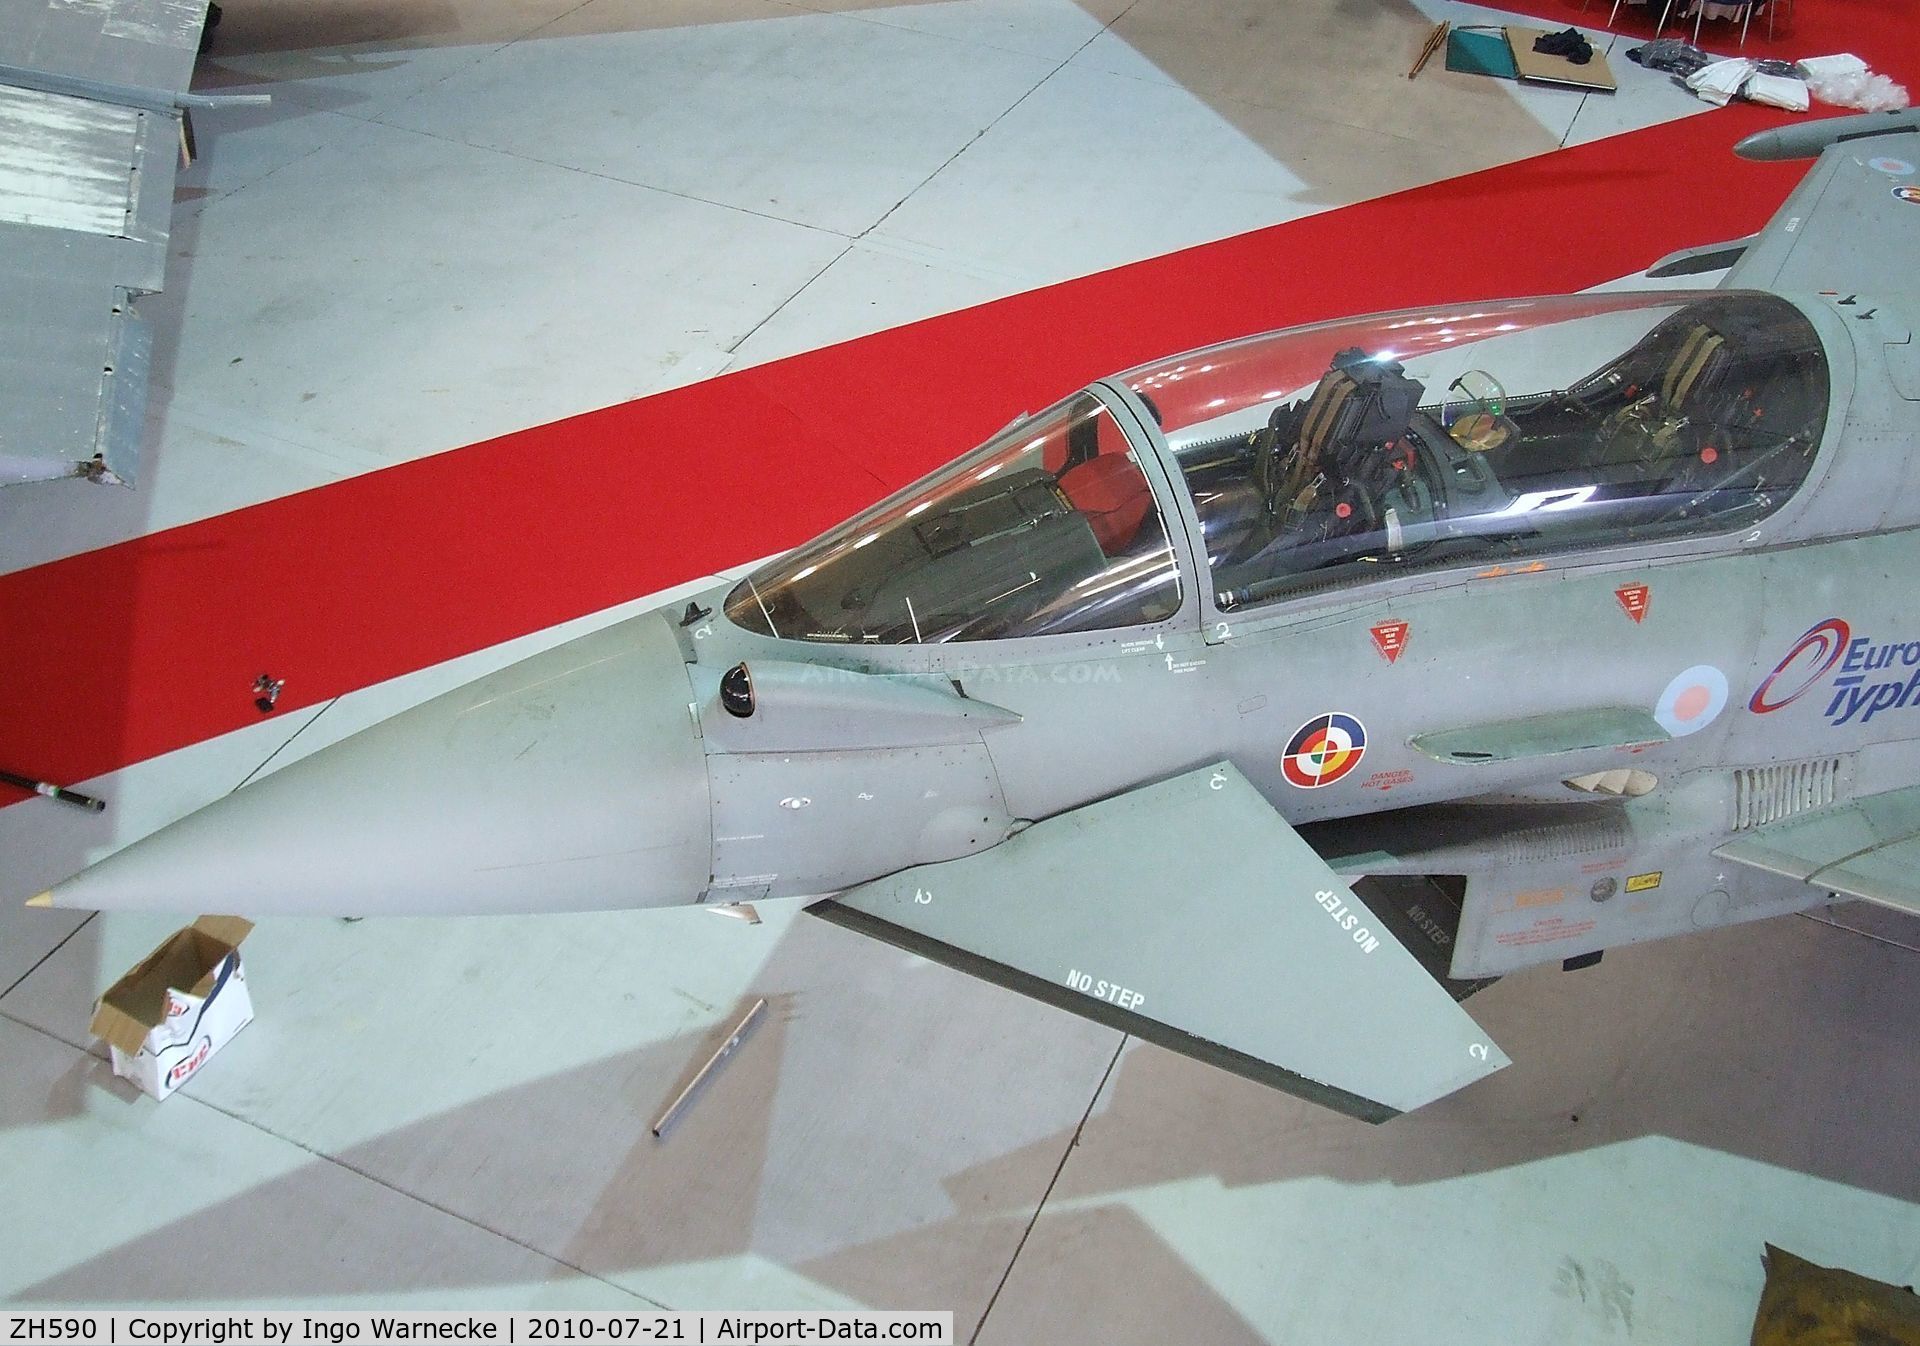 ZH590, 1997 Eurofighter EF-2000 Typhoon T1 C/N DA4, Eurofighter EF2000 Typhoon T1 at the Imperial War Museum, Duxford